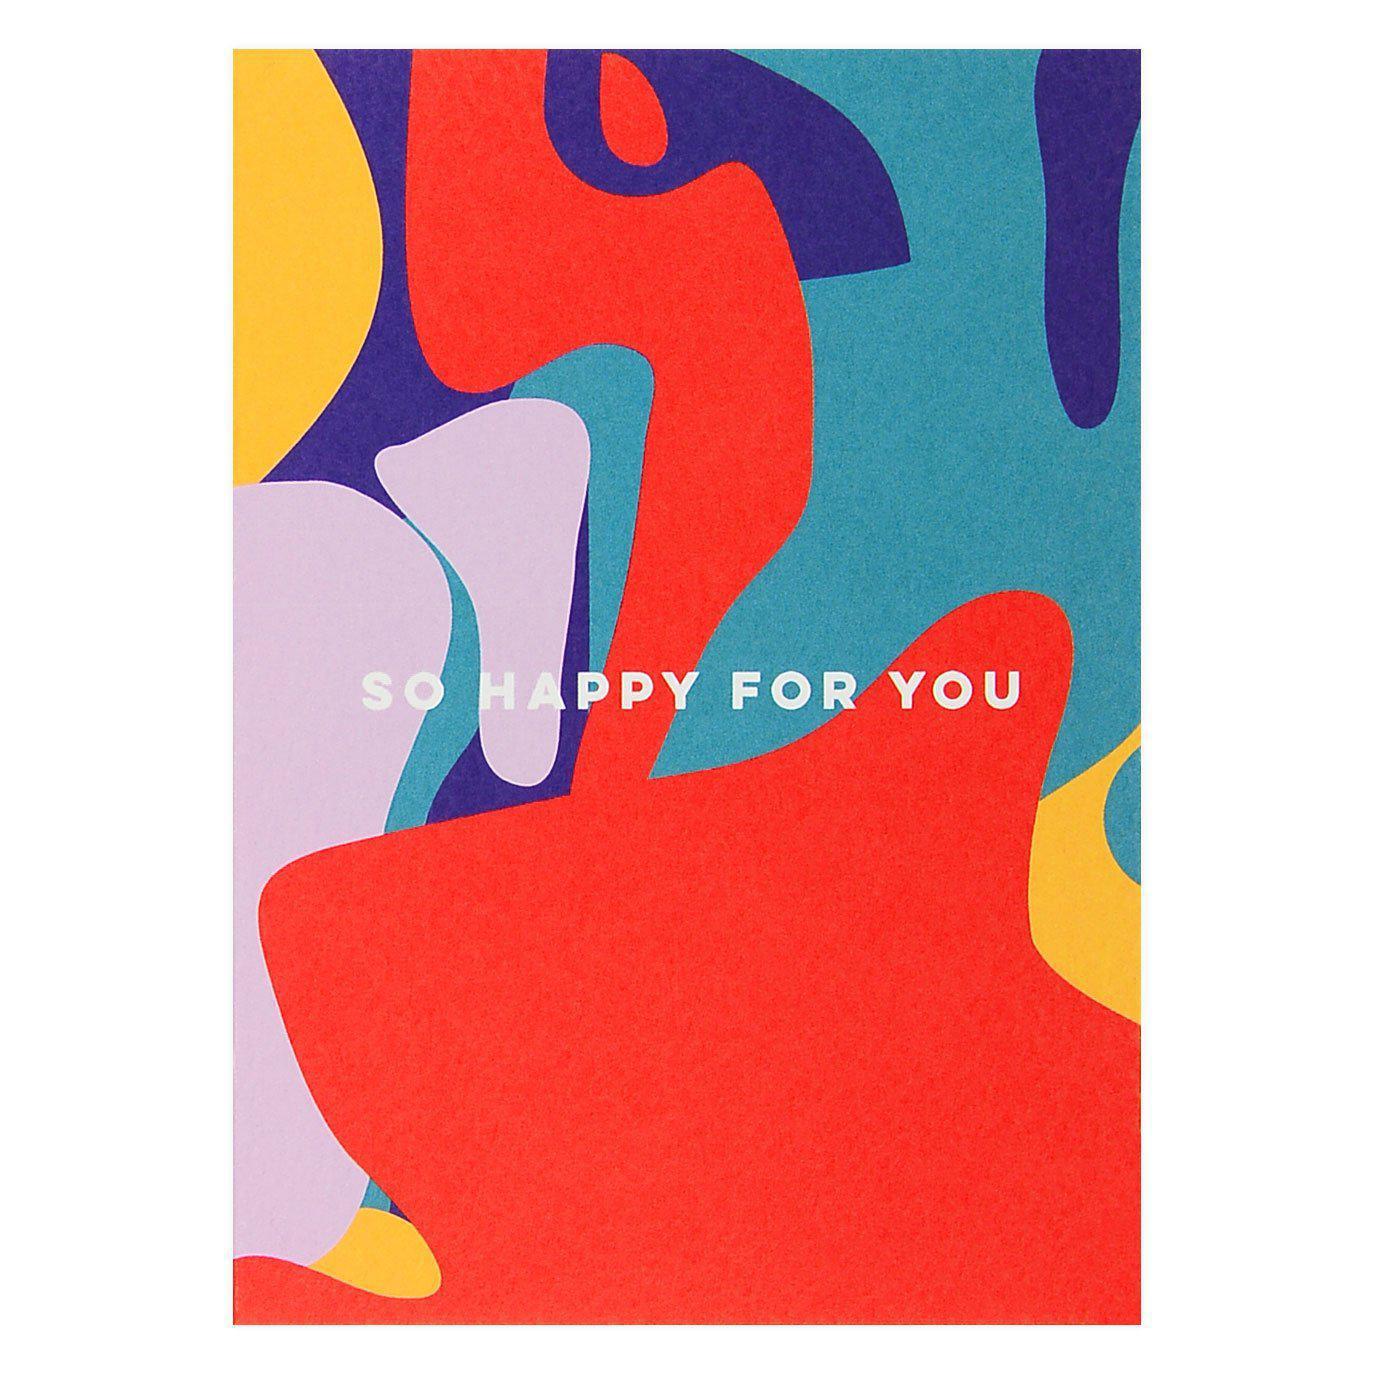 So Happy For You Shapes Greeting Card